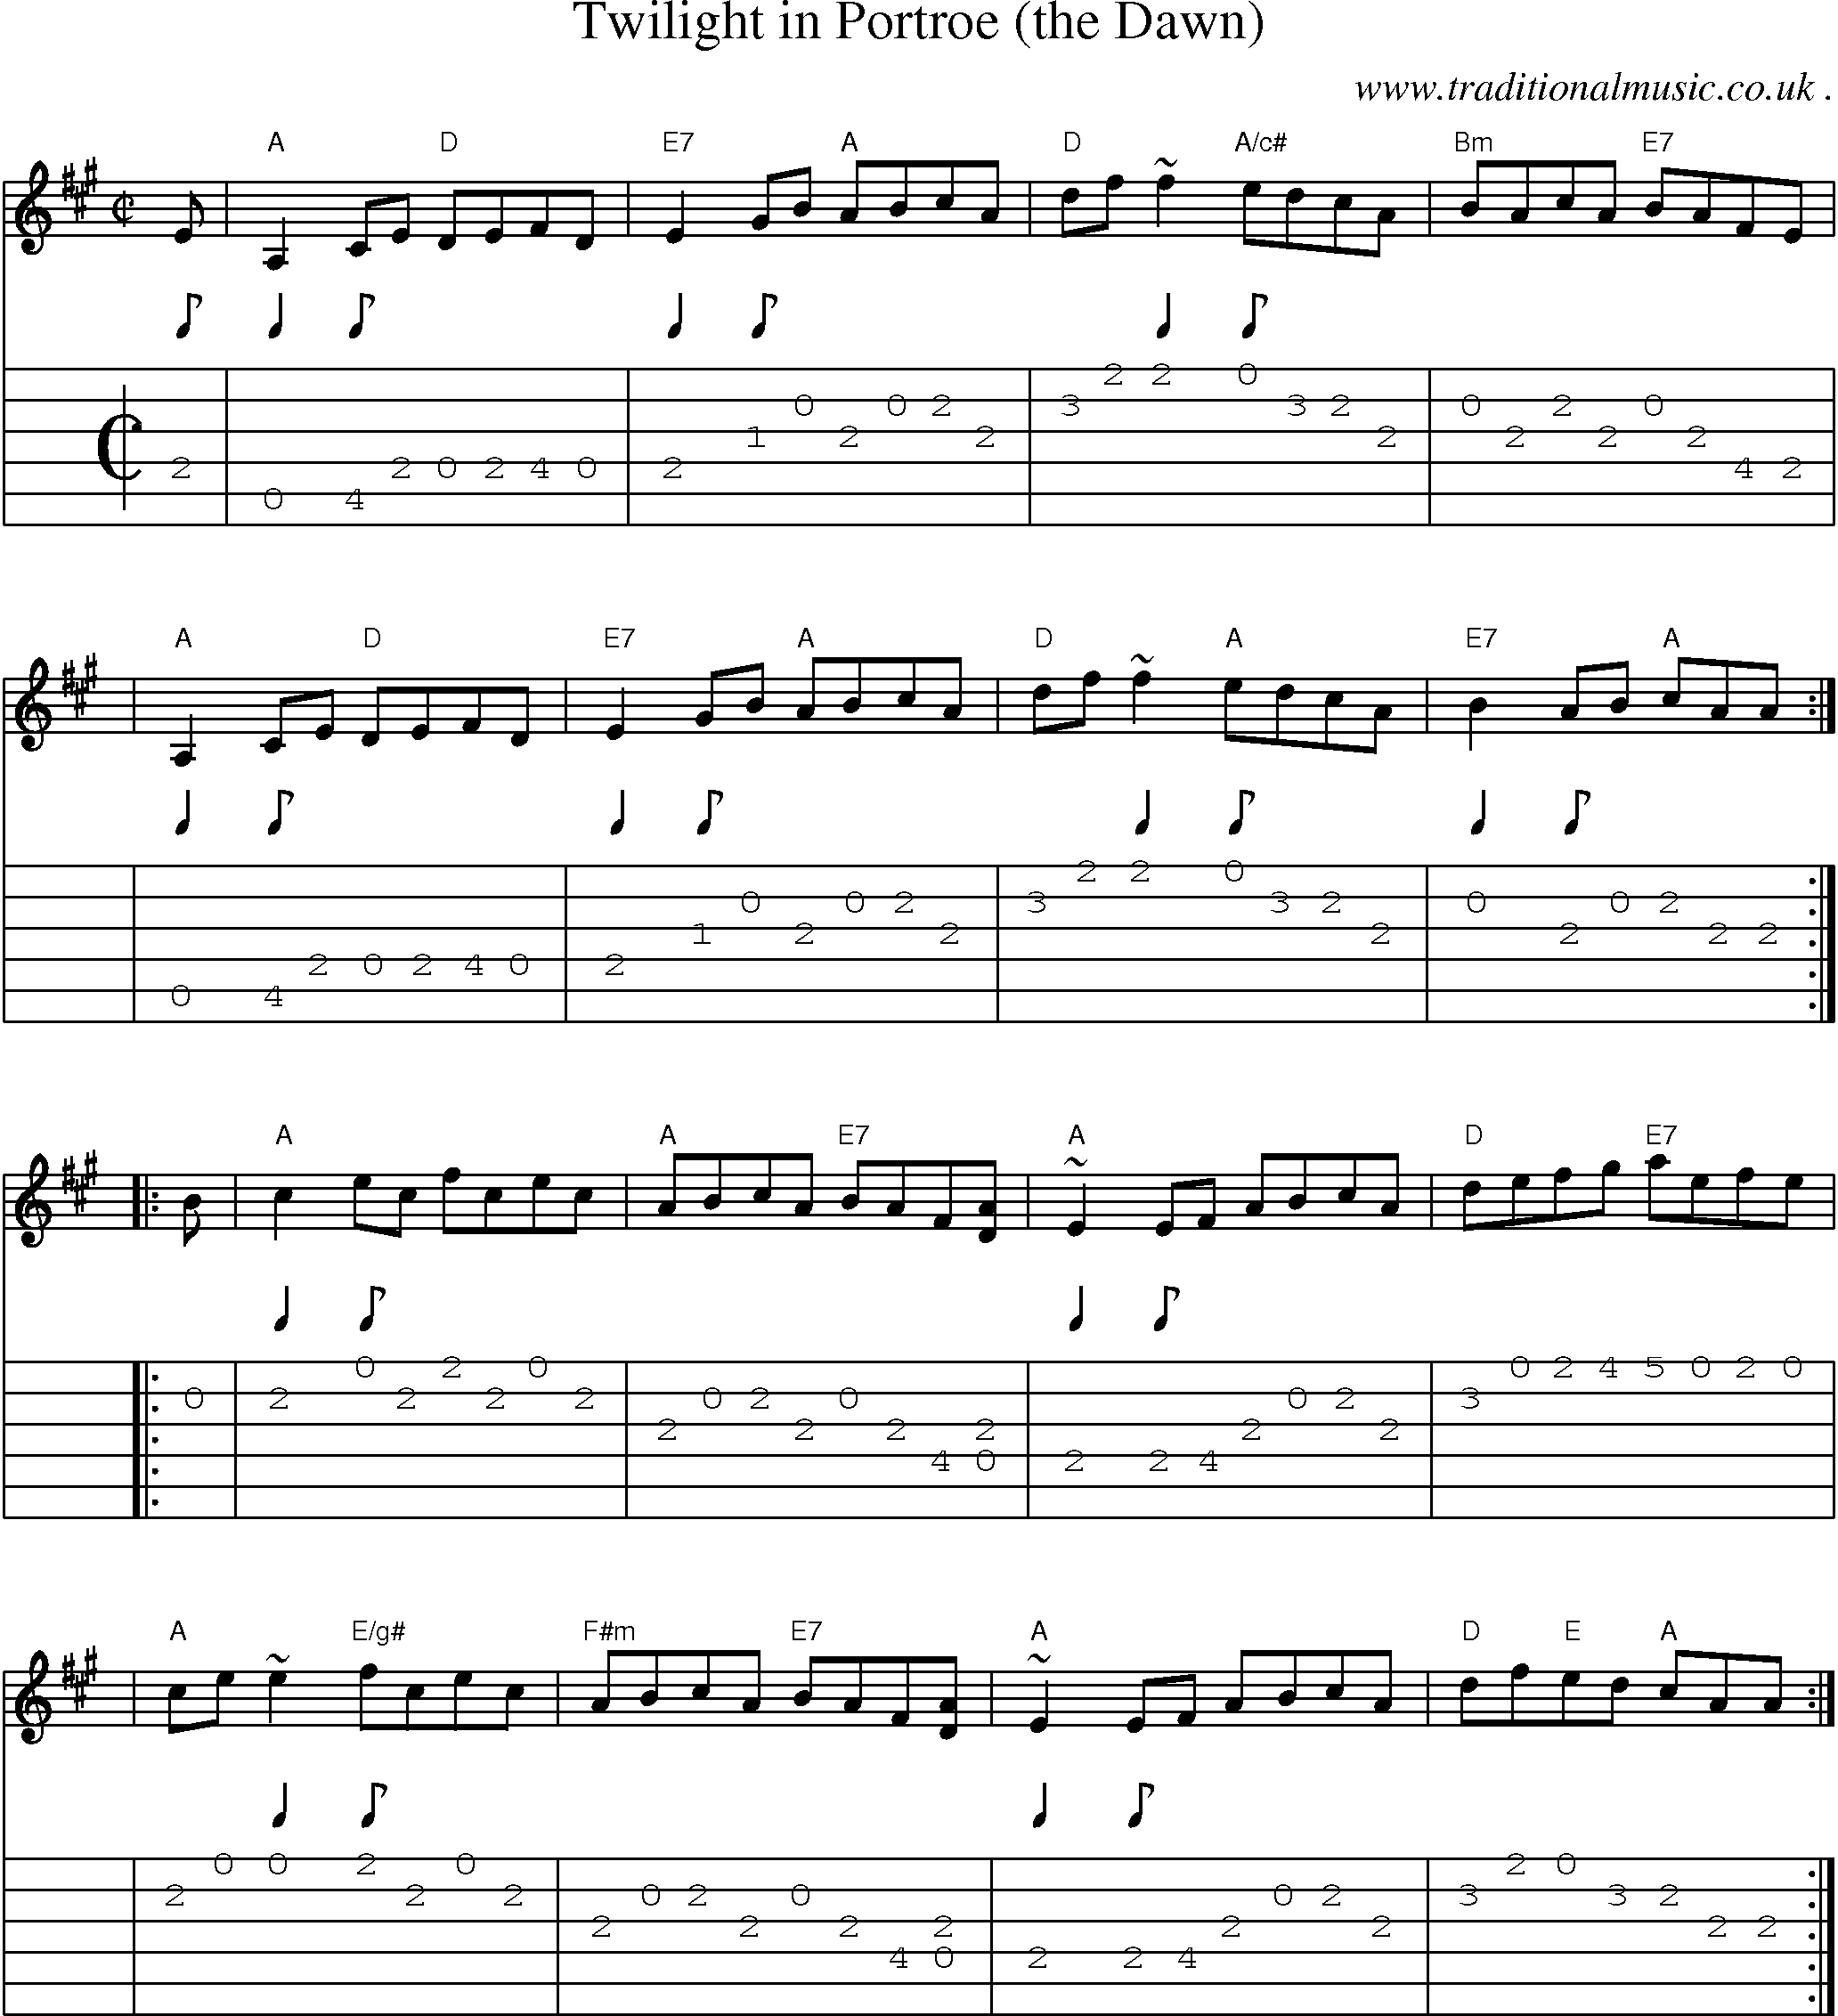 Sheet-music  score, Chords and Guitar Tabs for Twilight In Portroe The Dawn